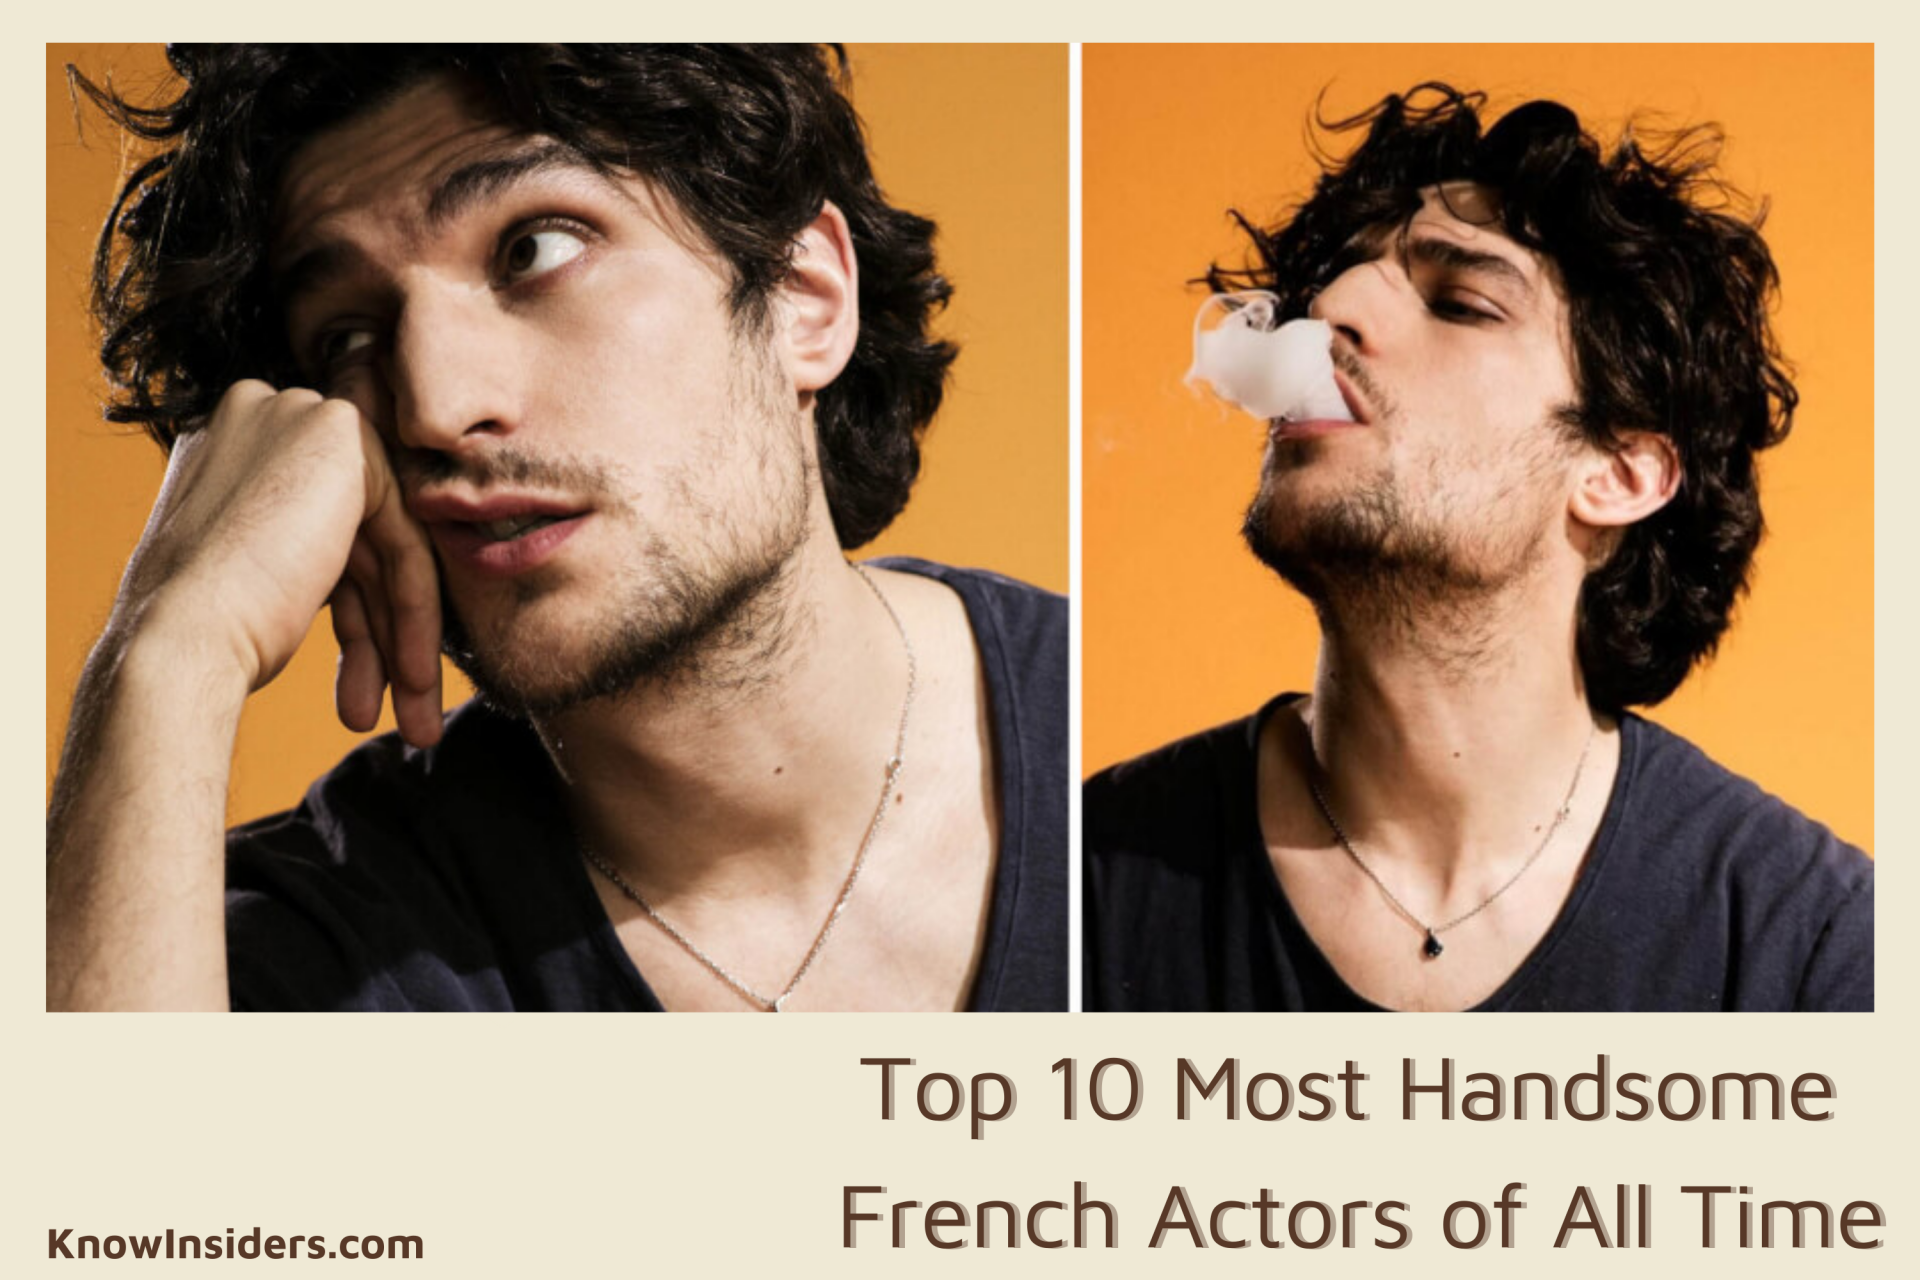 Top 10 Most Handsome French Actors of All Time